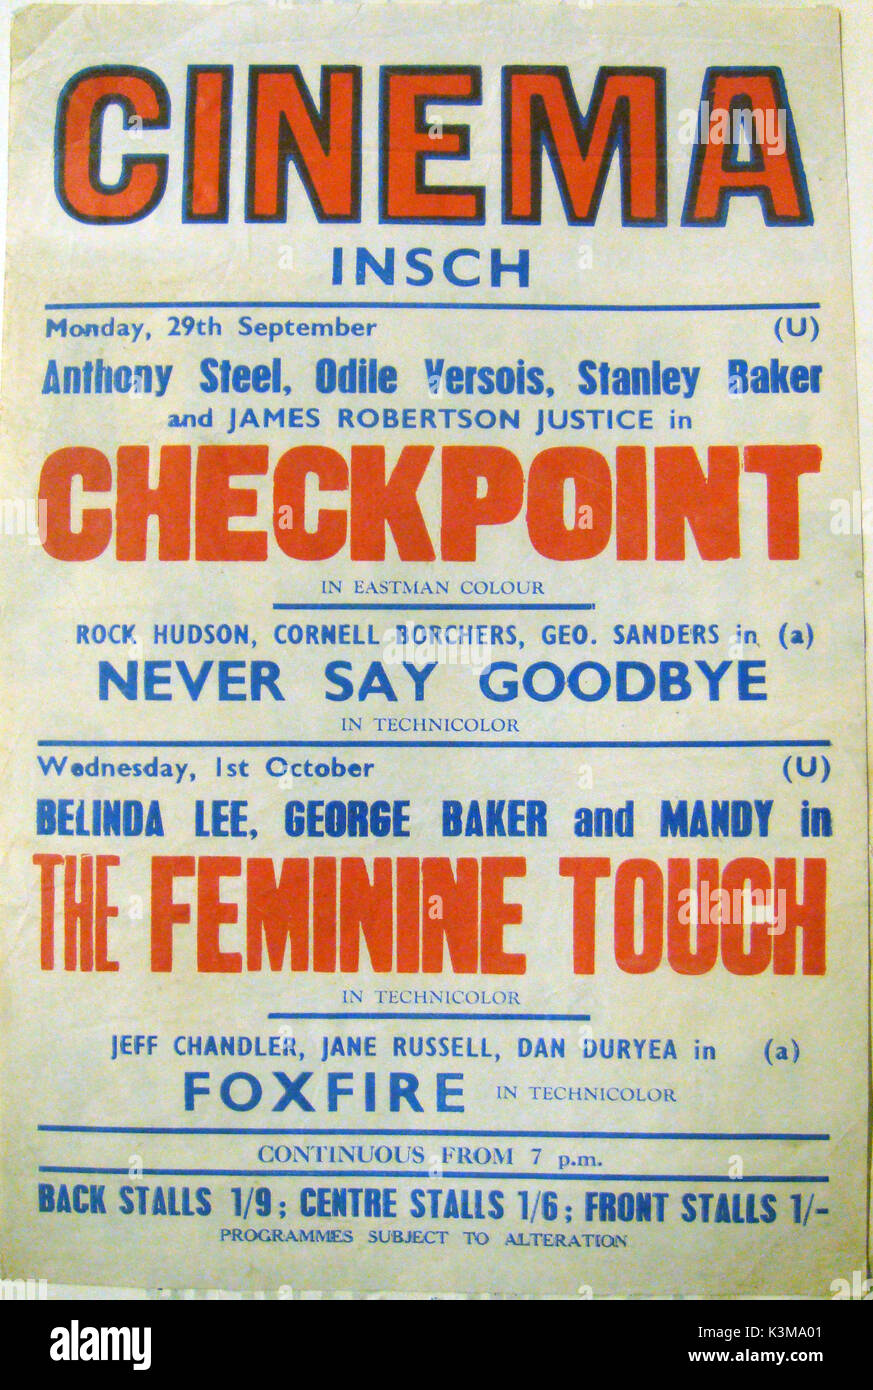 British films have prominence as the main features here with CHECKPOINT supported by the American film A poster for twice weekly screenings in 1958 at the Public Hall, Insch , a village in Aberdeenshire. September of that year marked the re-opening of regular screenings after the closing of the Glen Cinema shows there which had been a weekly event since c1939. These restarted shows were run by Aberdeen based projectionist Ronald Grant who ran what eventually became a 3 hall rural cinema crcuit under the Suburban Cinemas name.     Date: Stock Photo